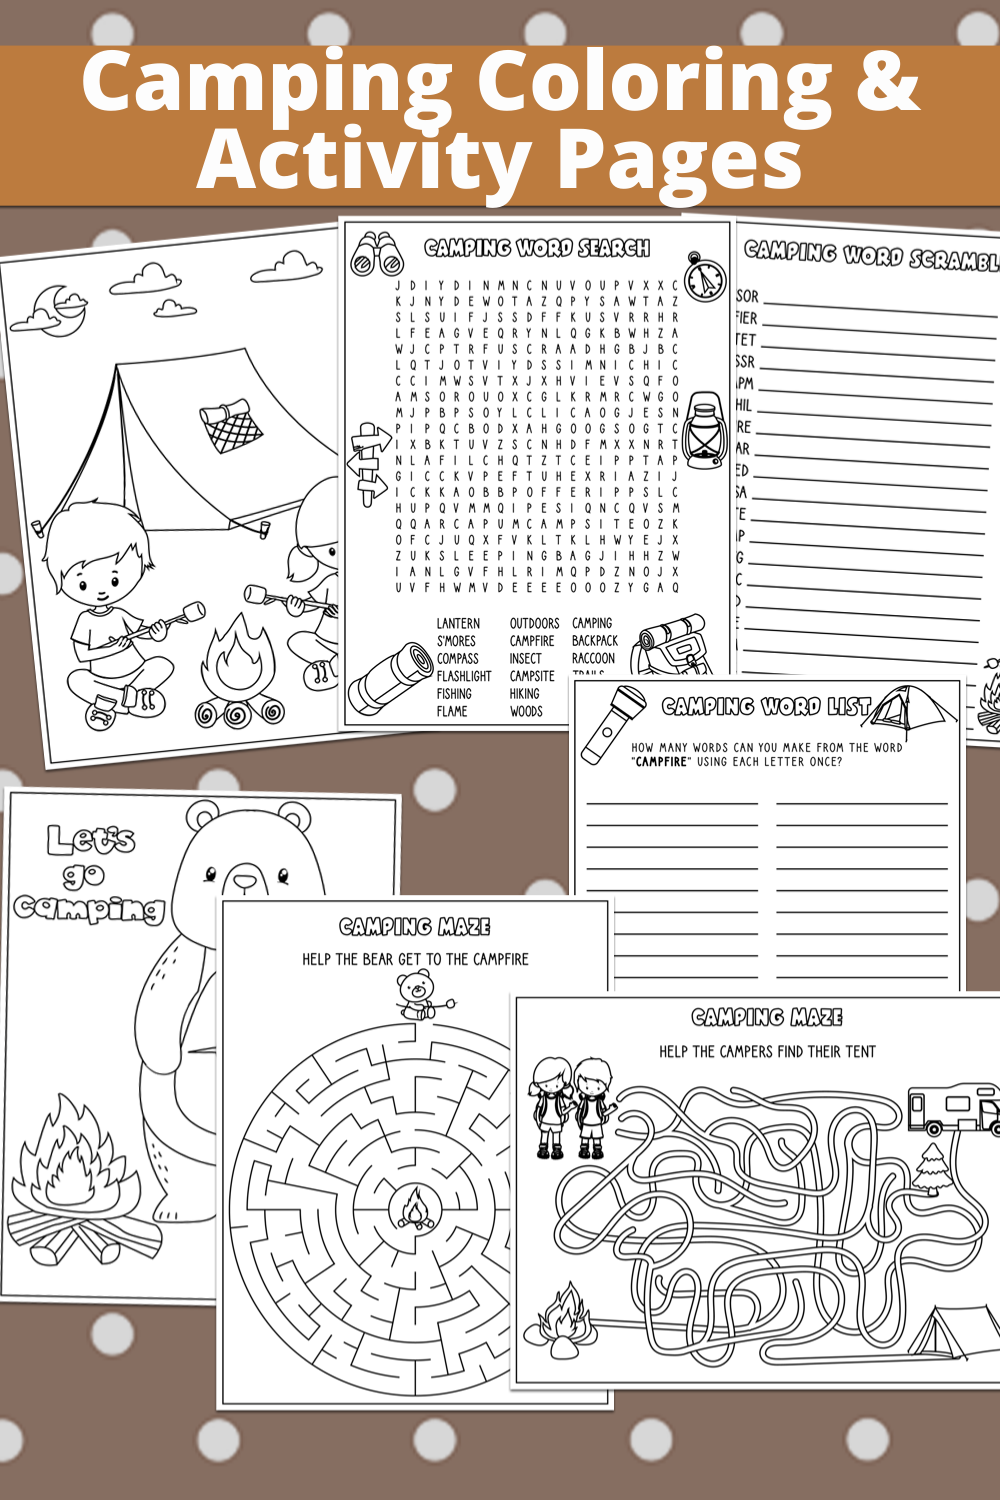 Download Free Camping Coloring Pages And Activity Pages For Kids | FaveCrafts.com